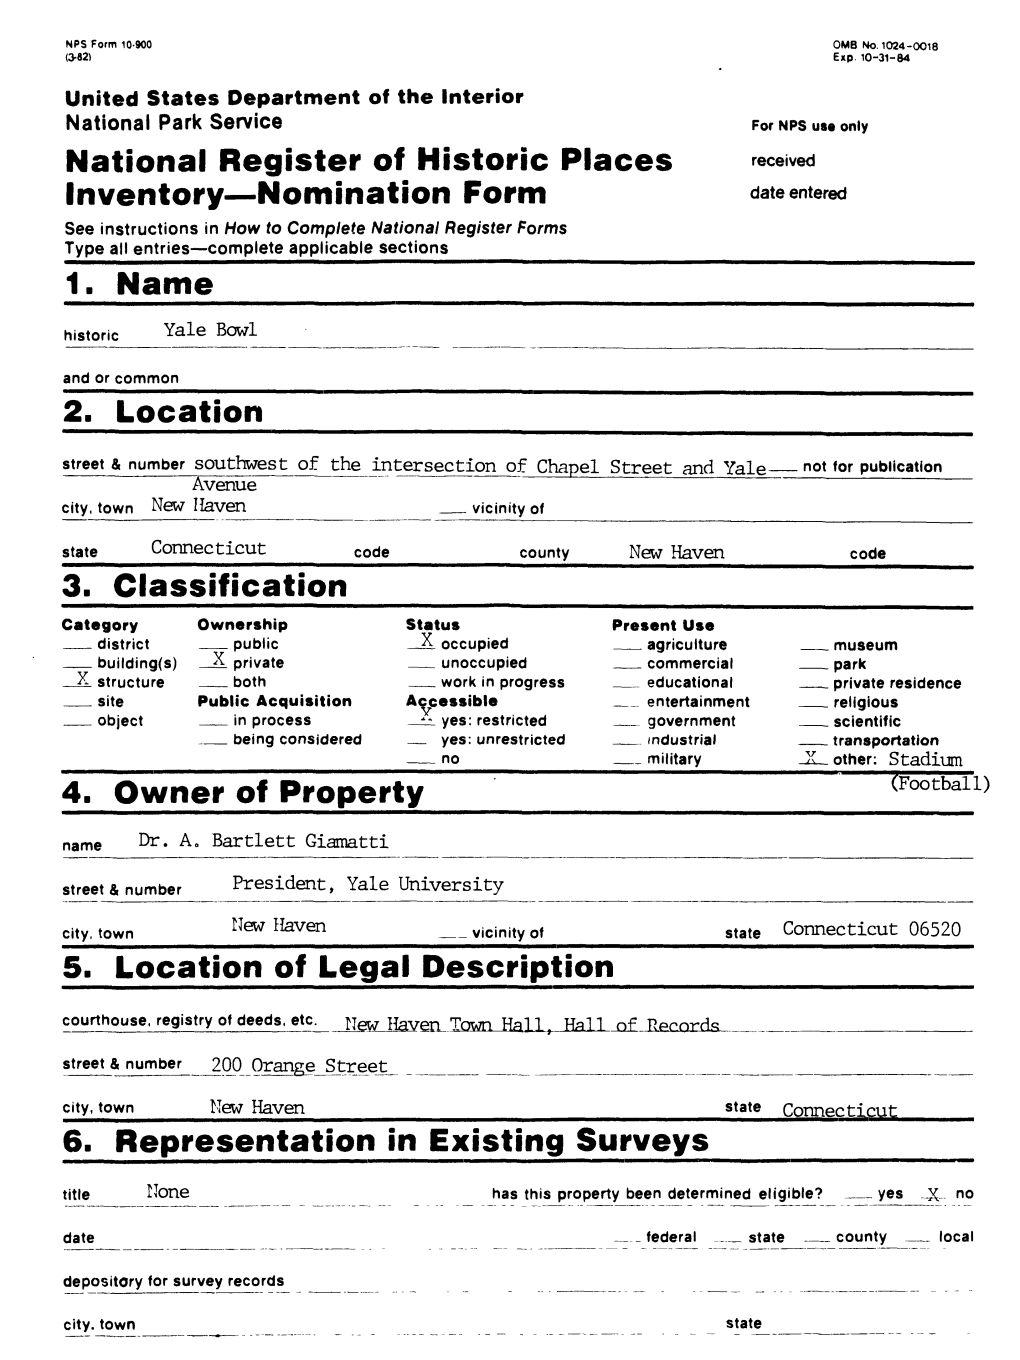 National Register of Historic Places Inventory Nomination Form Date